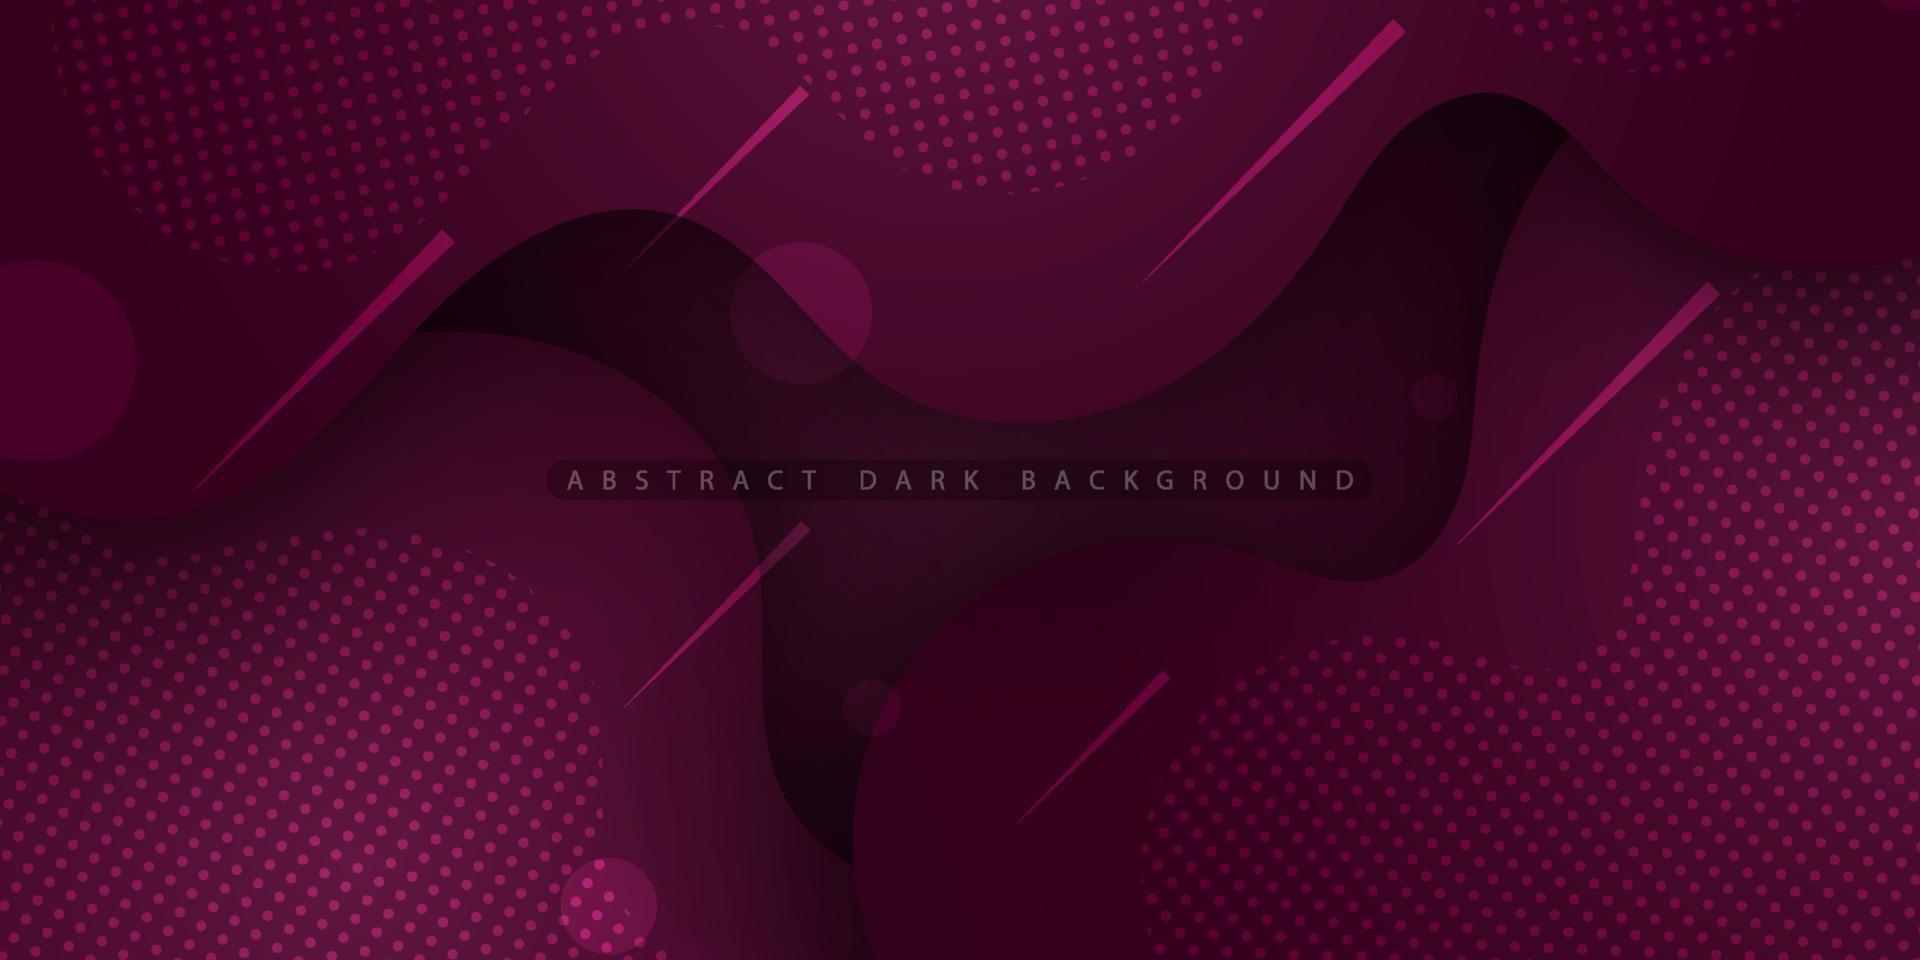 Dark red and purple gradient background with dynamic wave shapes. Abstract template and modern stylish design. Eps10 vector